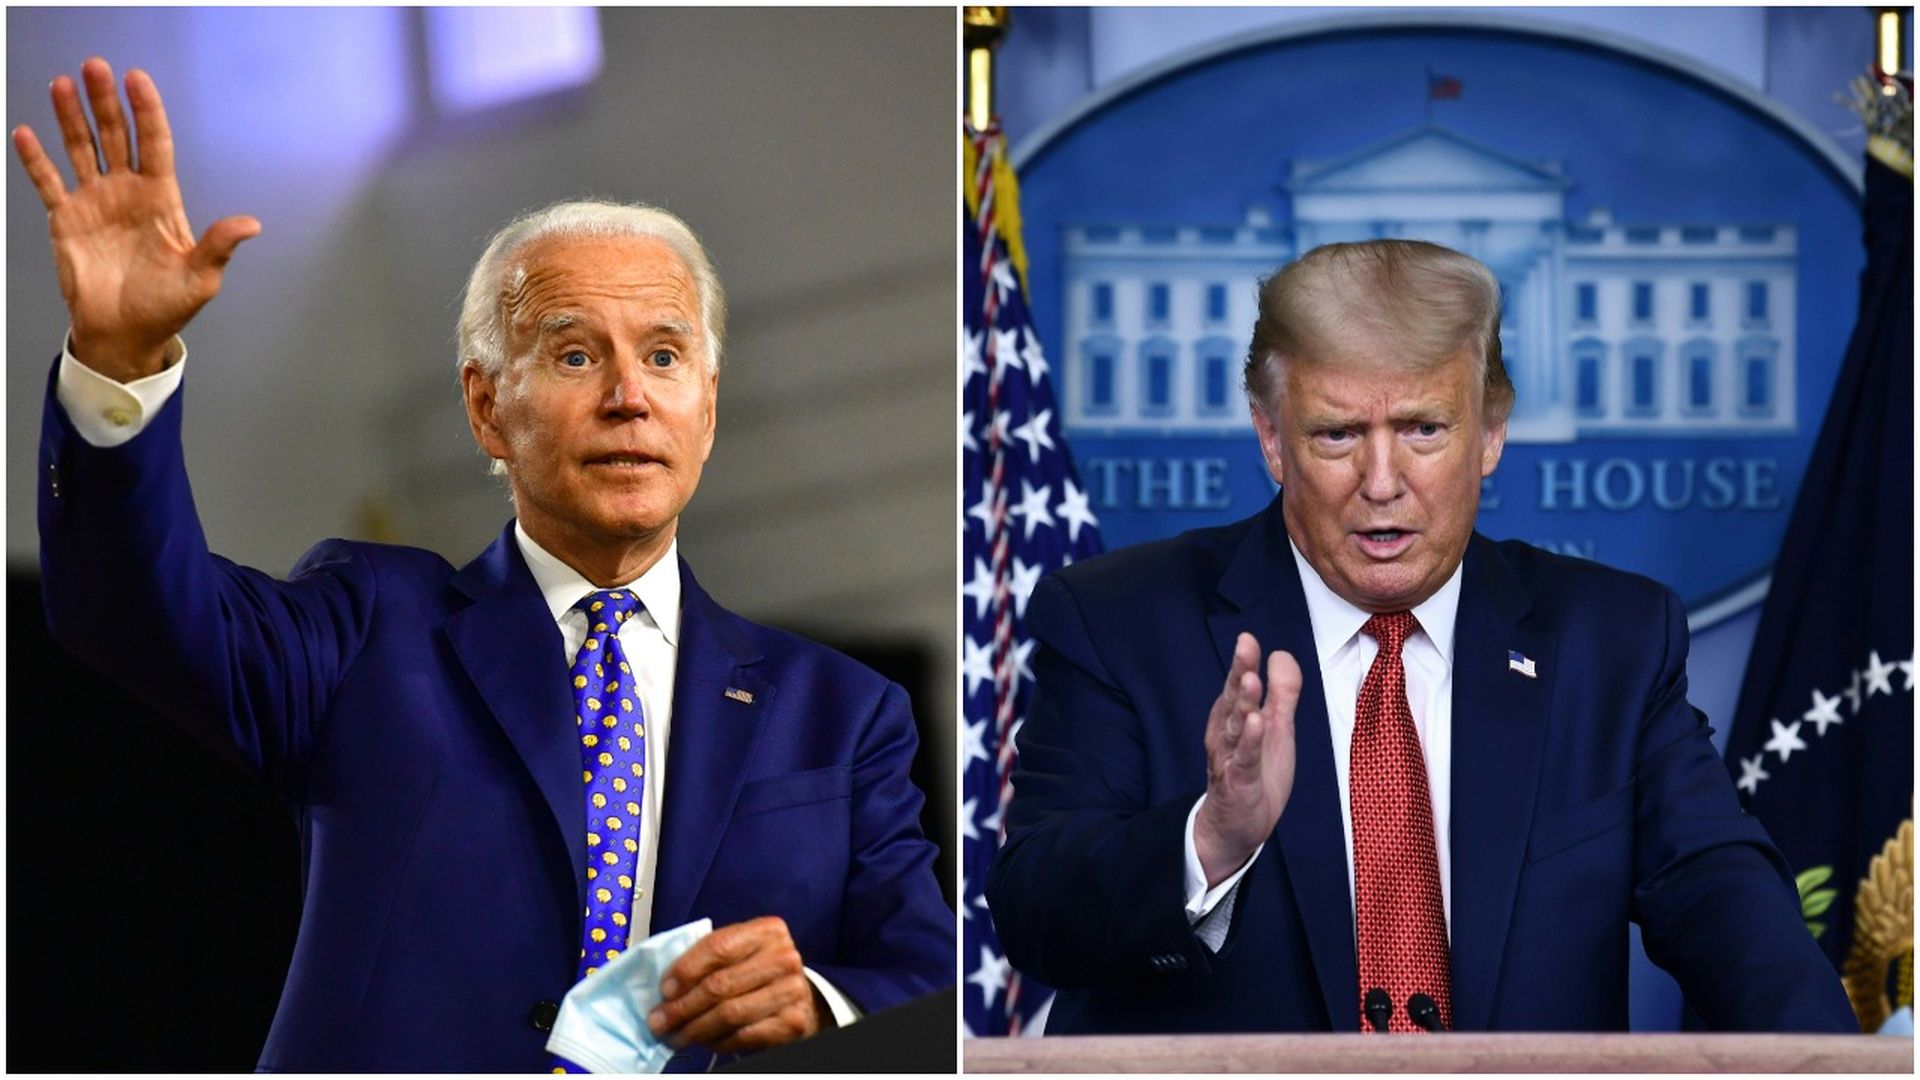 Trump says men may be "insulted" by Biden picking a woman for VP